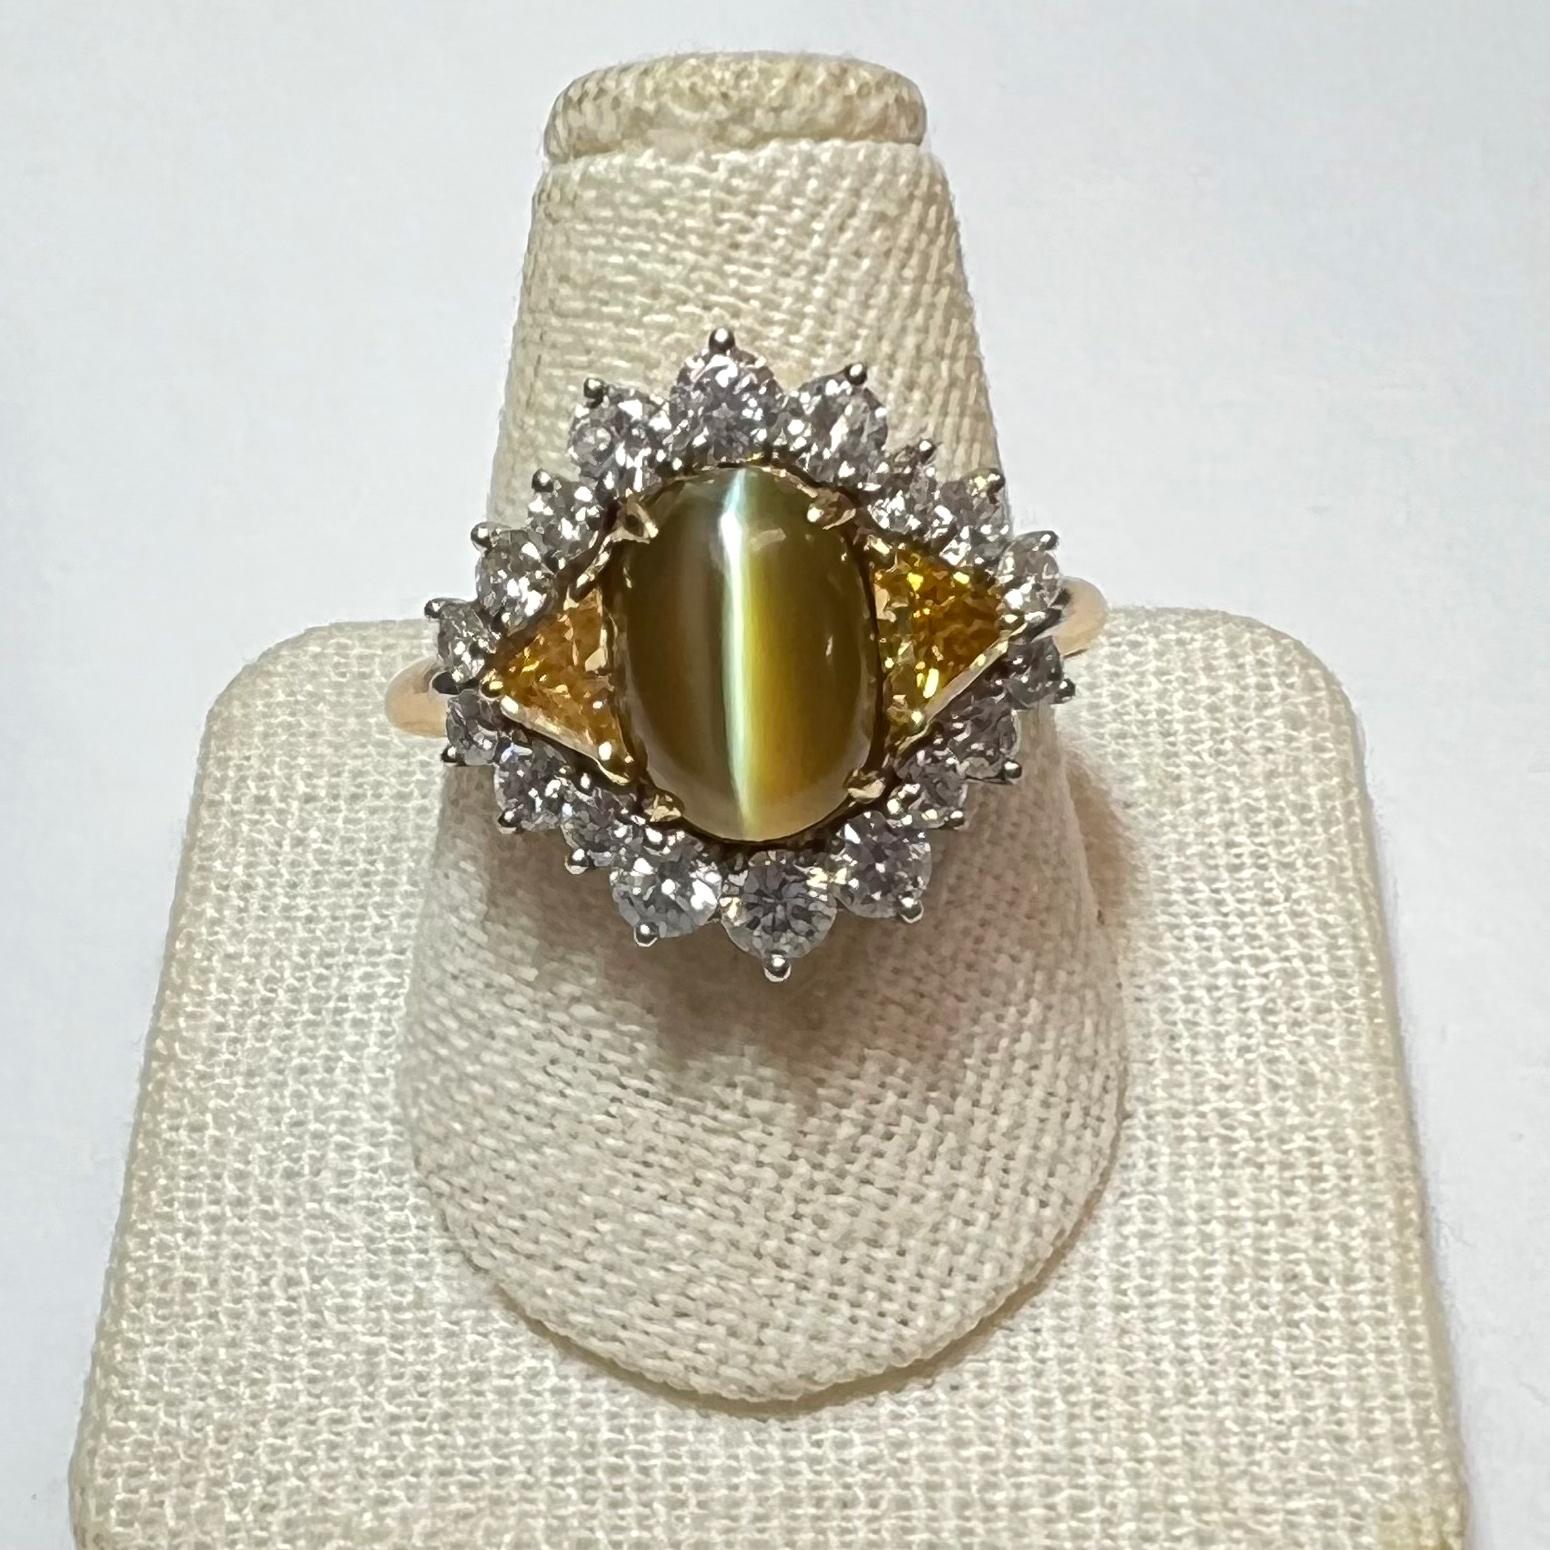 Fine cat's eye chrysoberyl weighing an estimated 7.00ct, set in an 18kt yellow gold mounting.  Flanked by two triangular fancy yellow diamonds totaling approximately 0.66ct. Surrounded by eighteen round brilliant cut diamonds totaling 1.16ct.  The